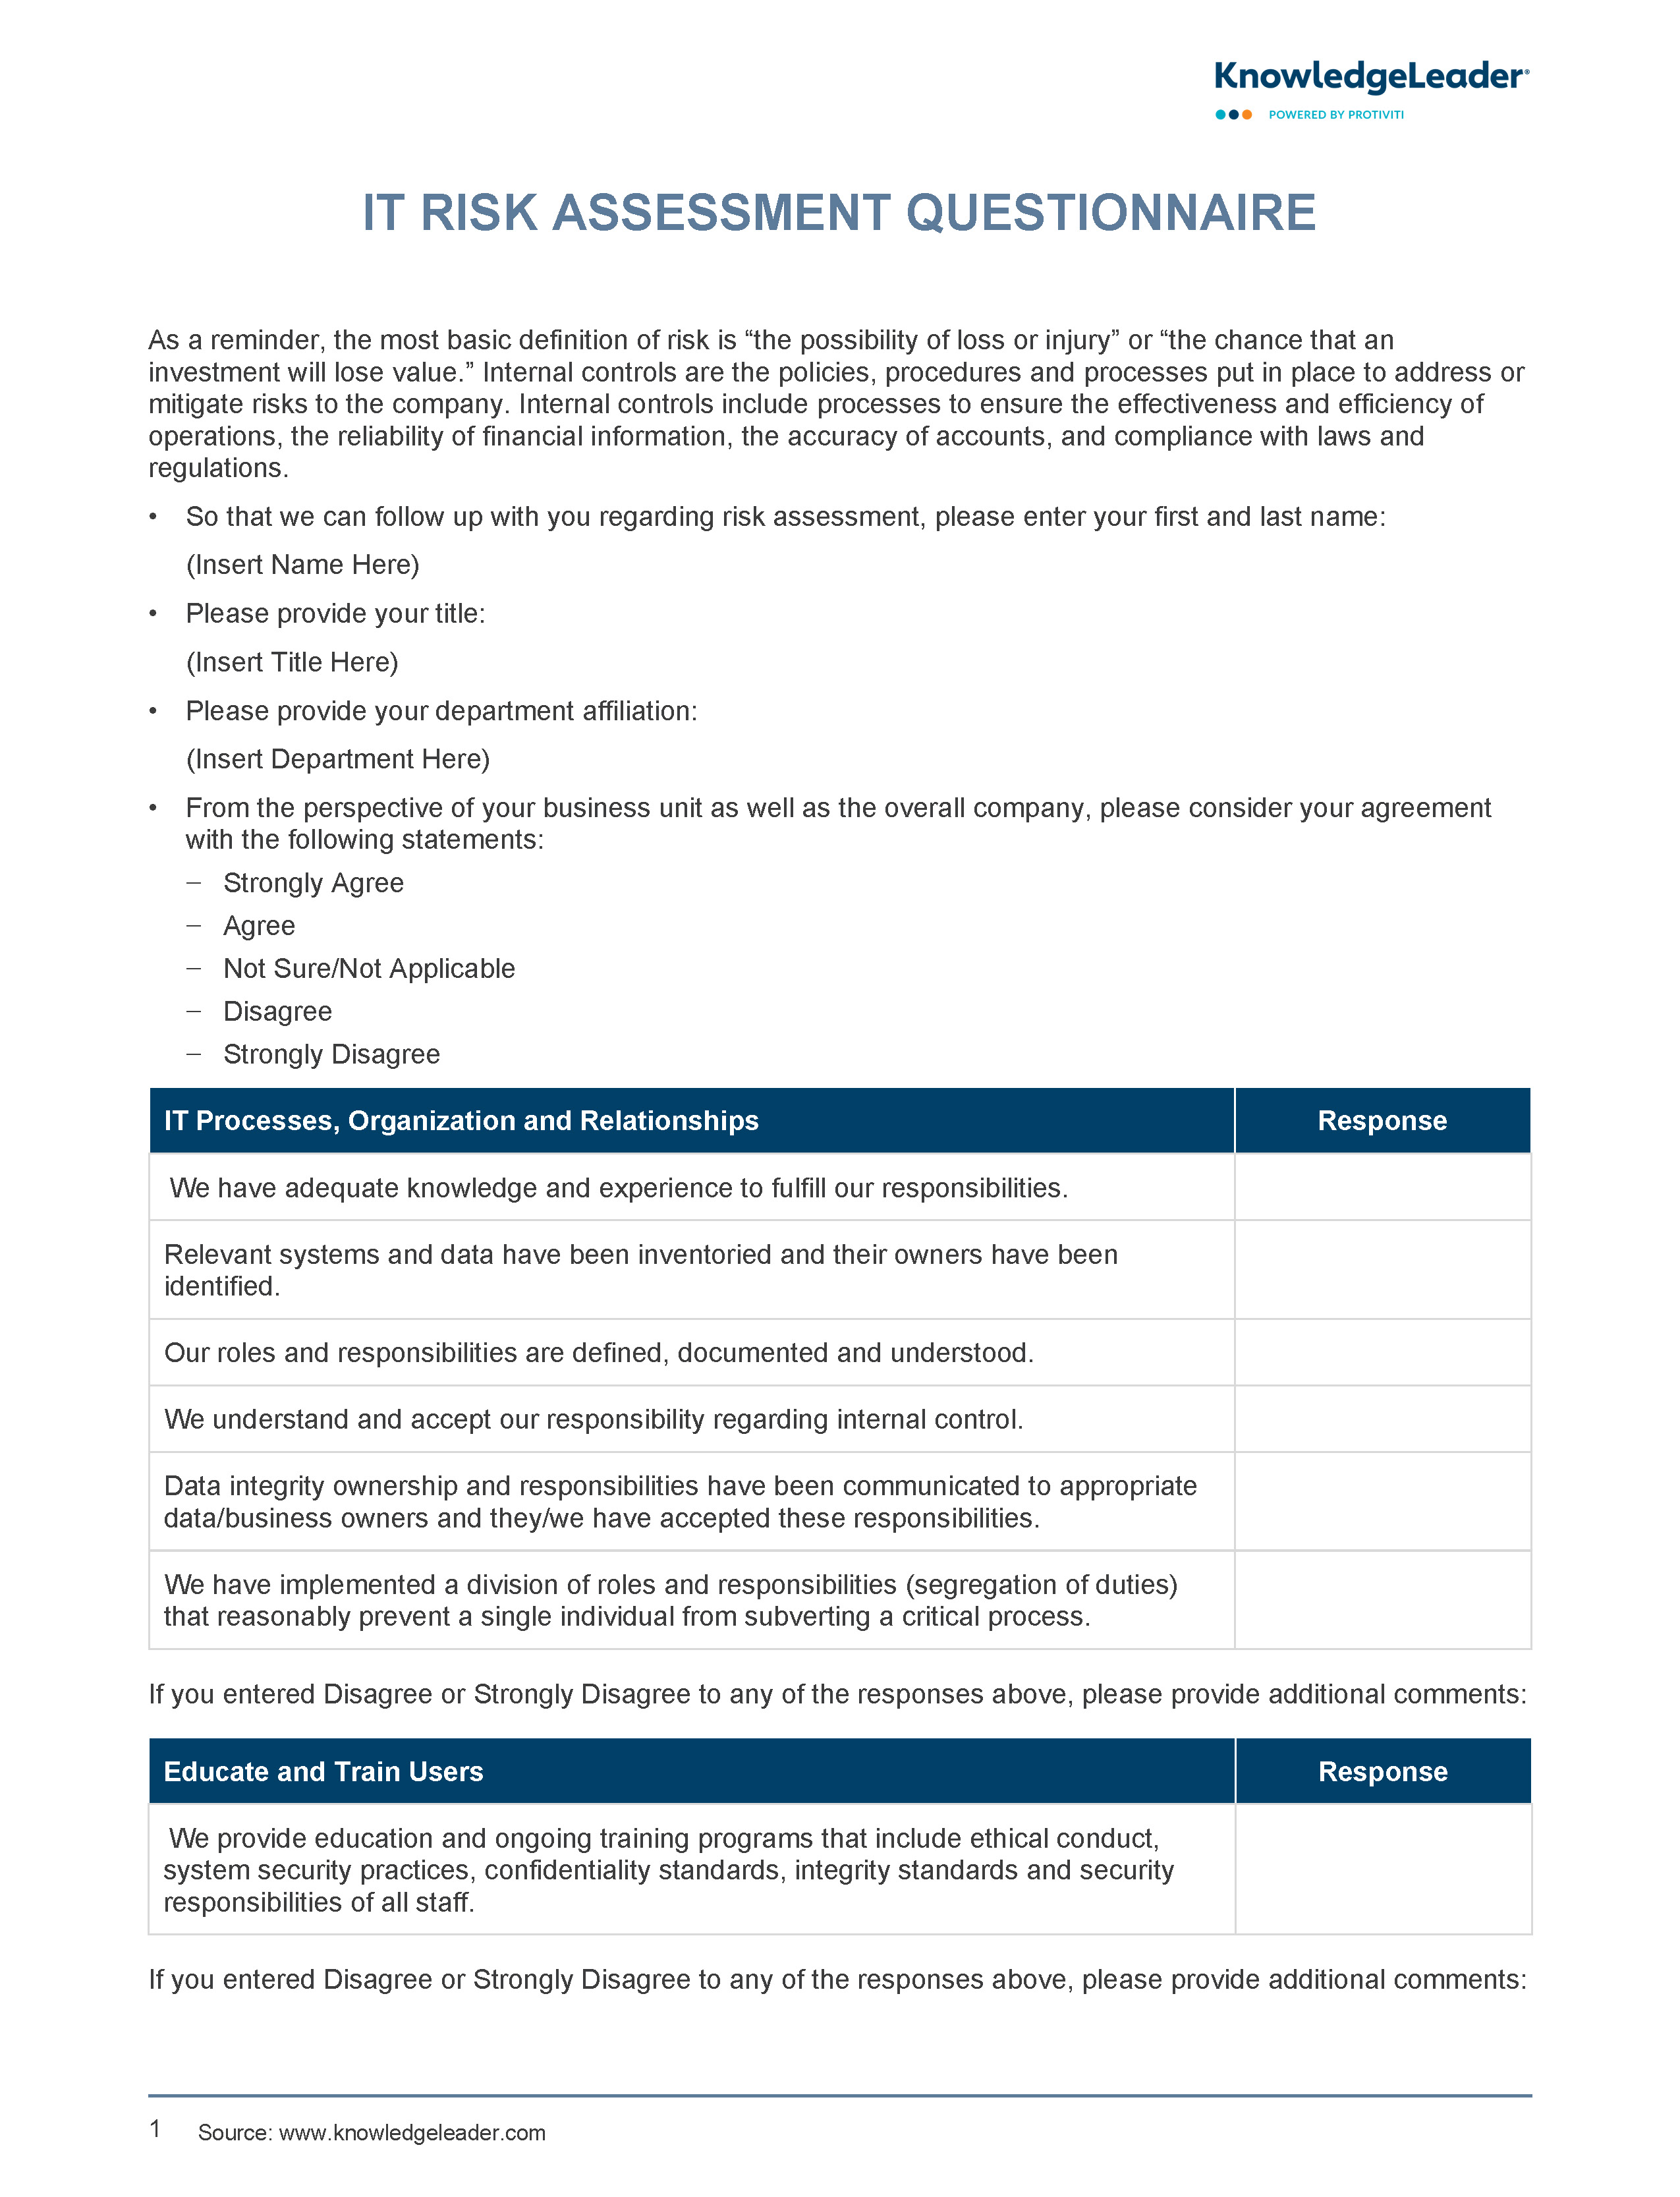 Screenshot of the first page of IT Risk Assessment Questionnaire